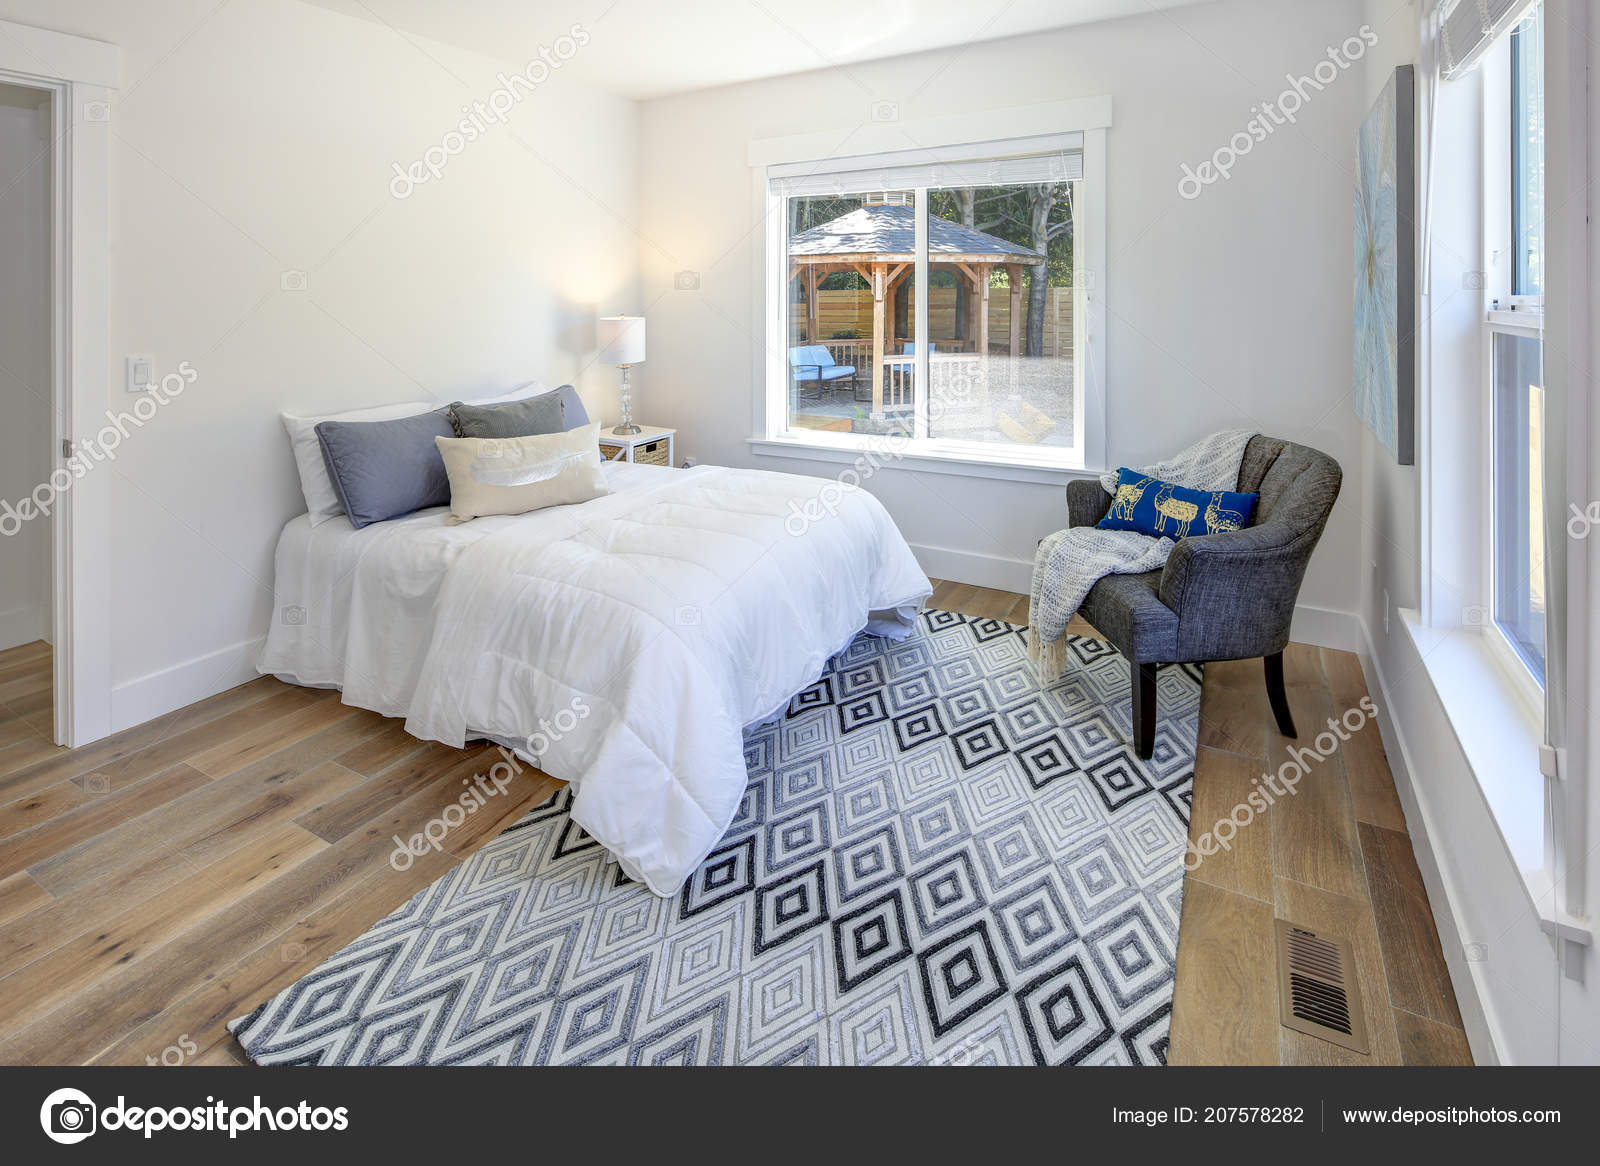 White Bedroom Design Tons Light Large Bed Atop Gray Diamond Stock Photo C Alabn 207578282